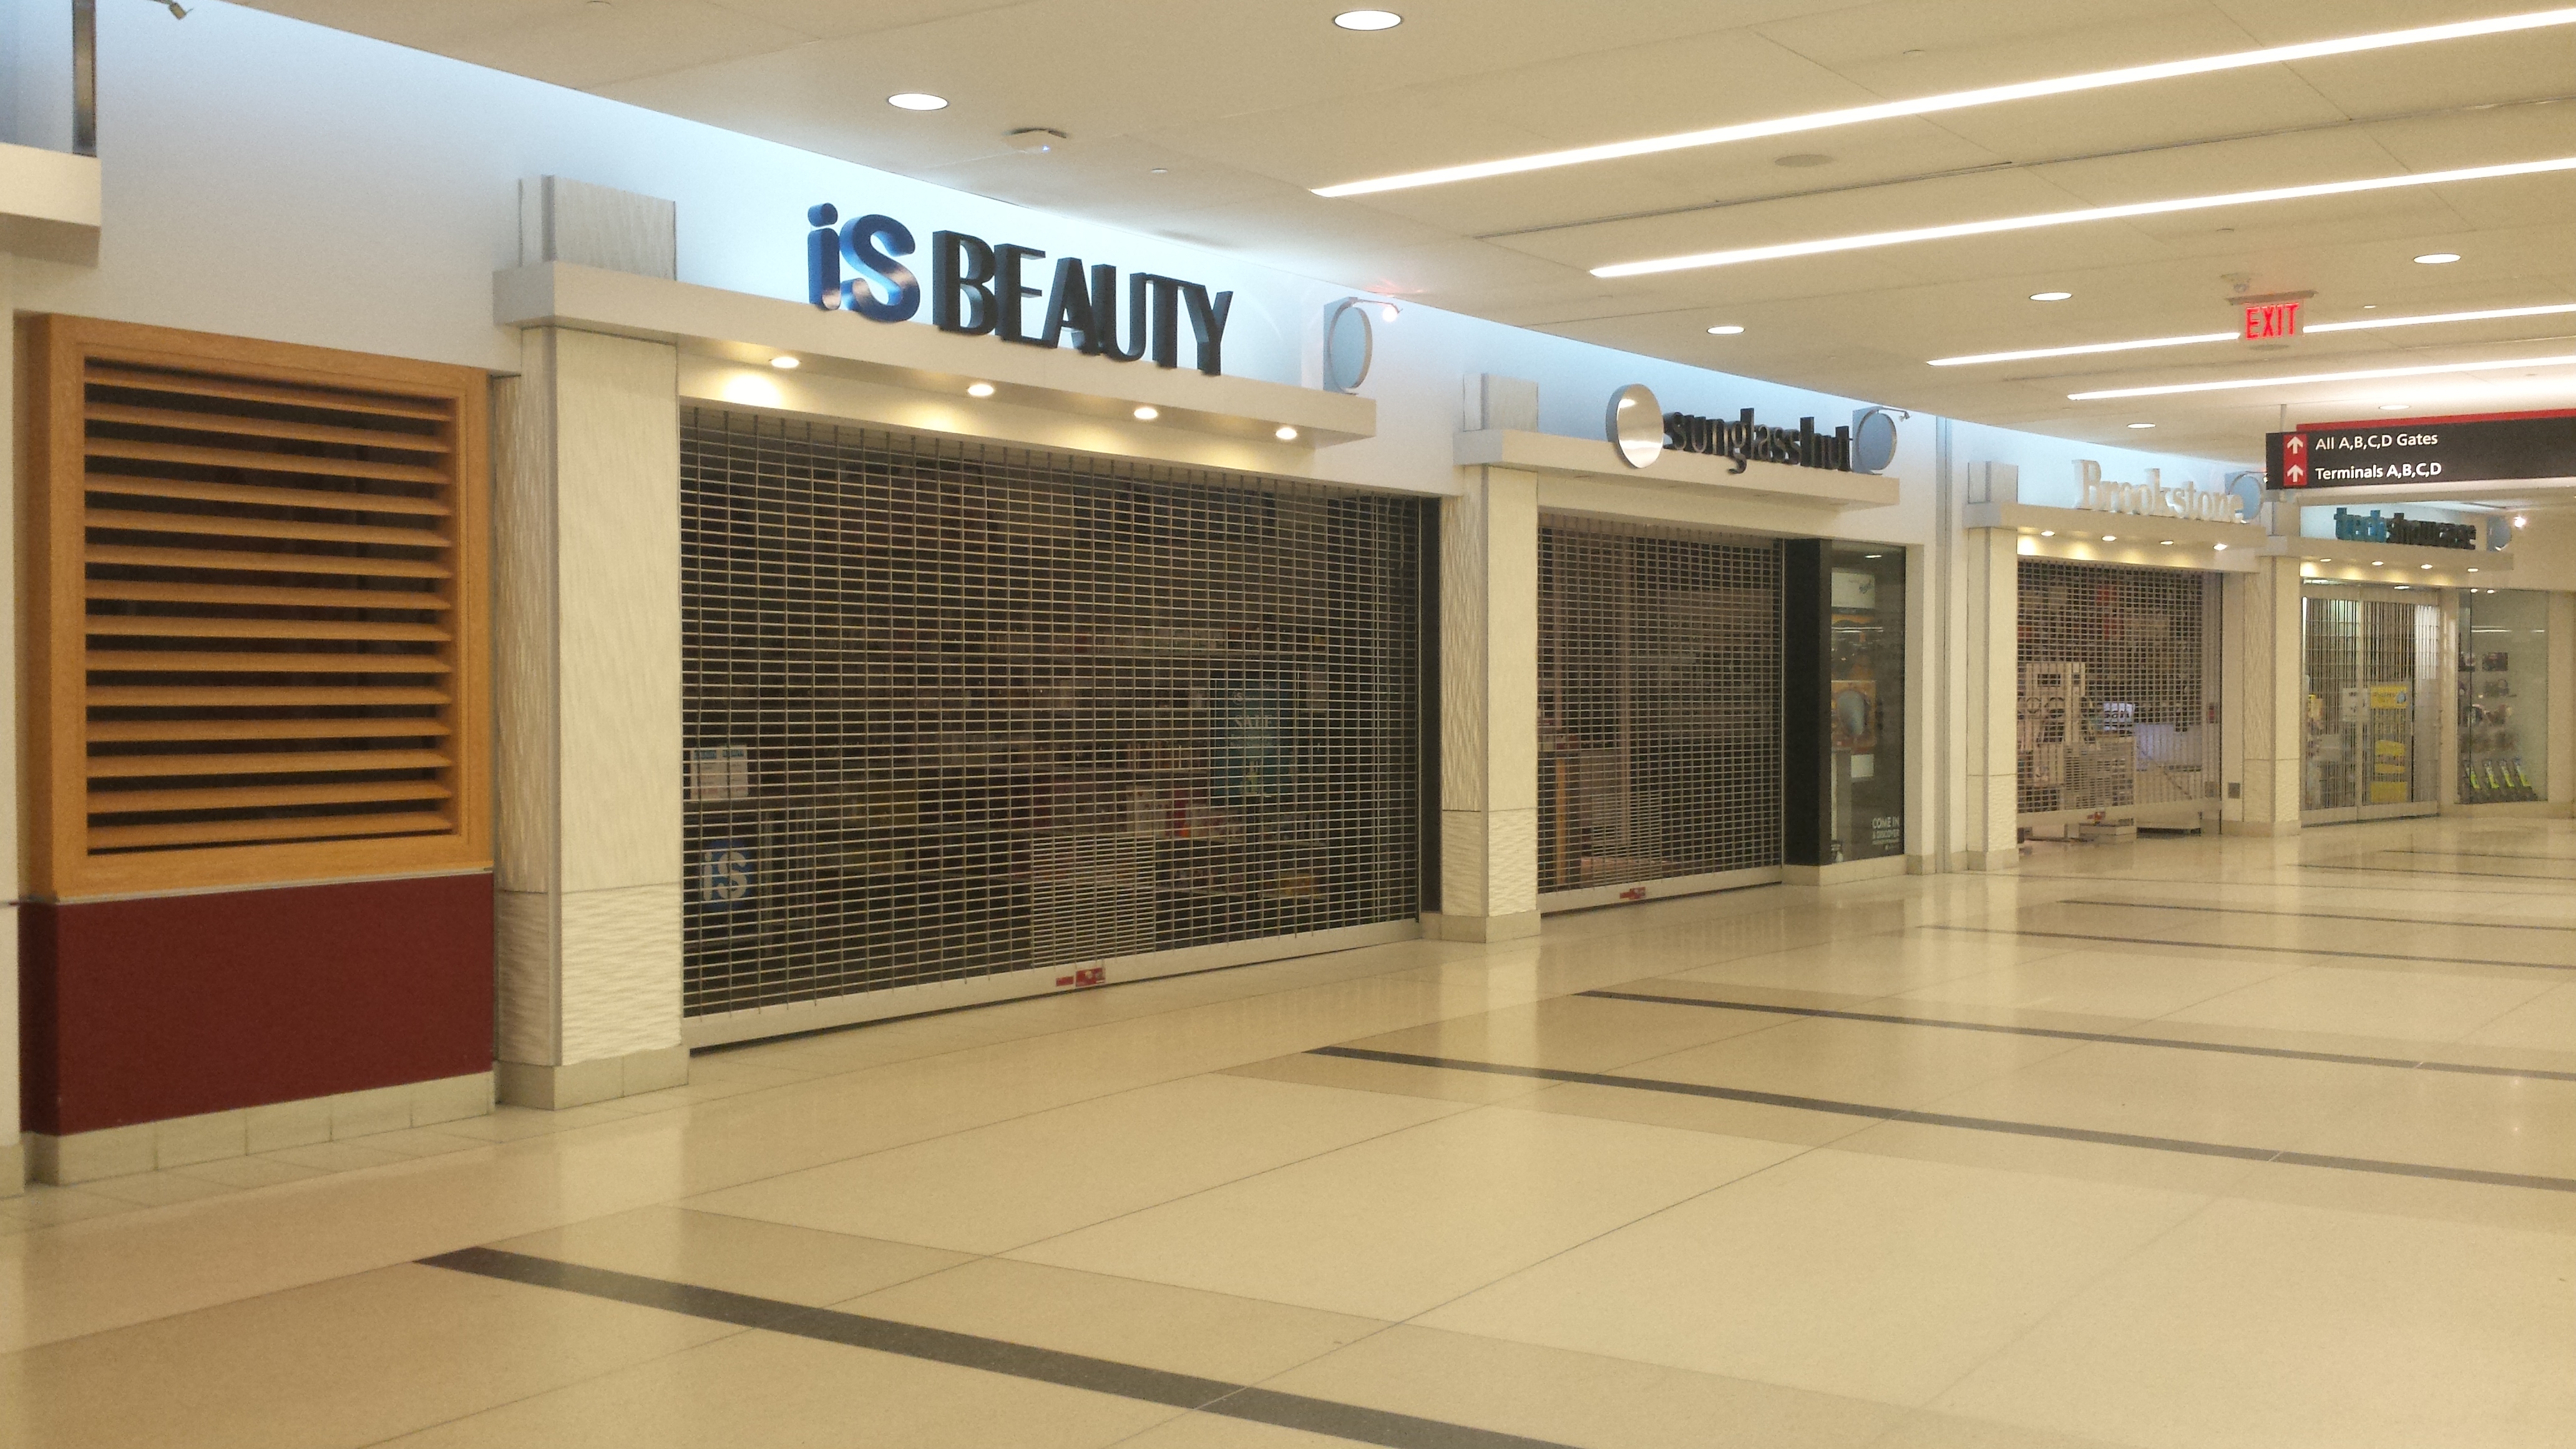 Retail shops in airport - Grille - leading pic.